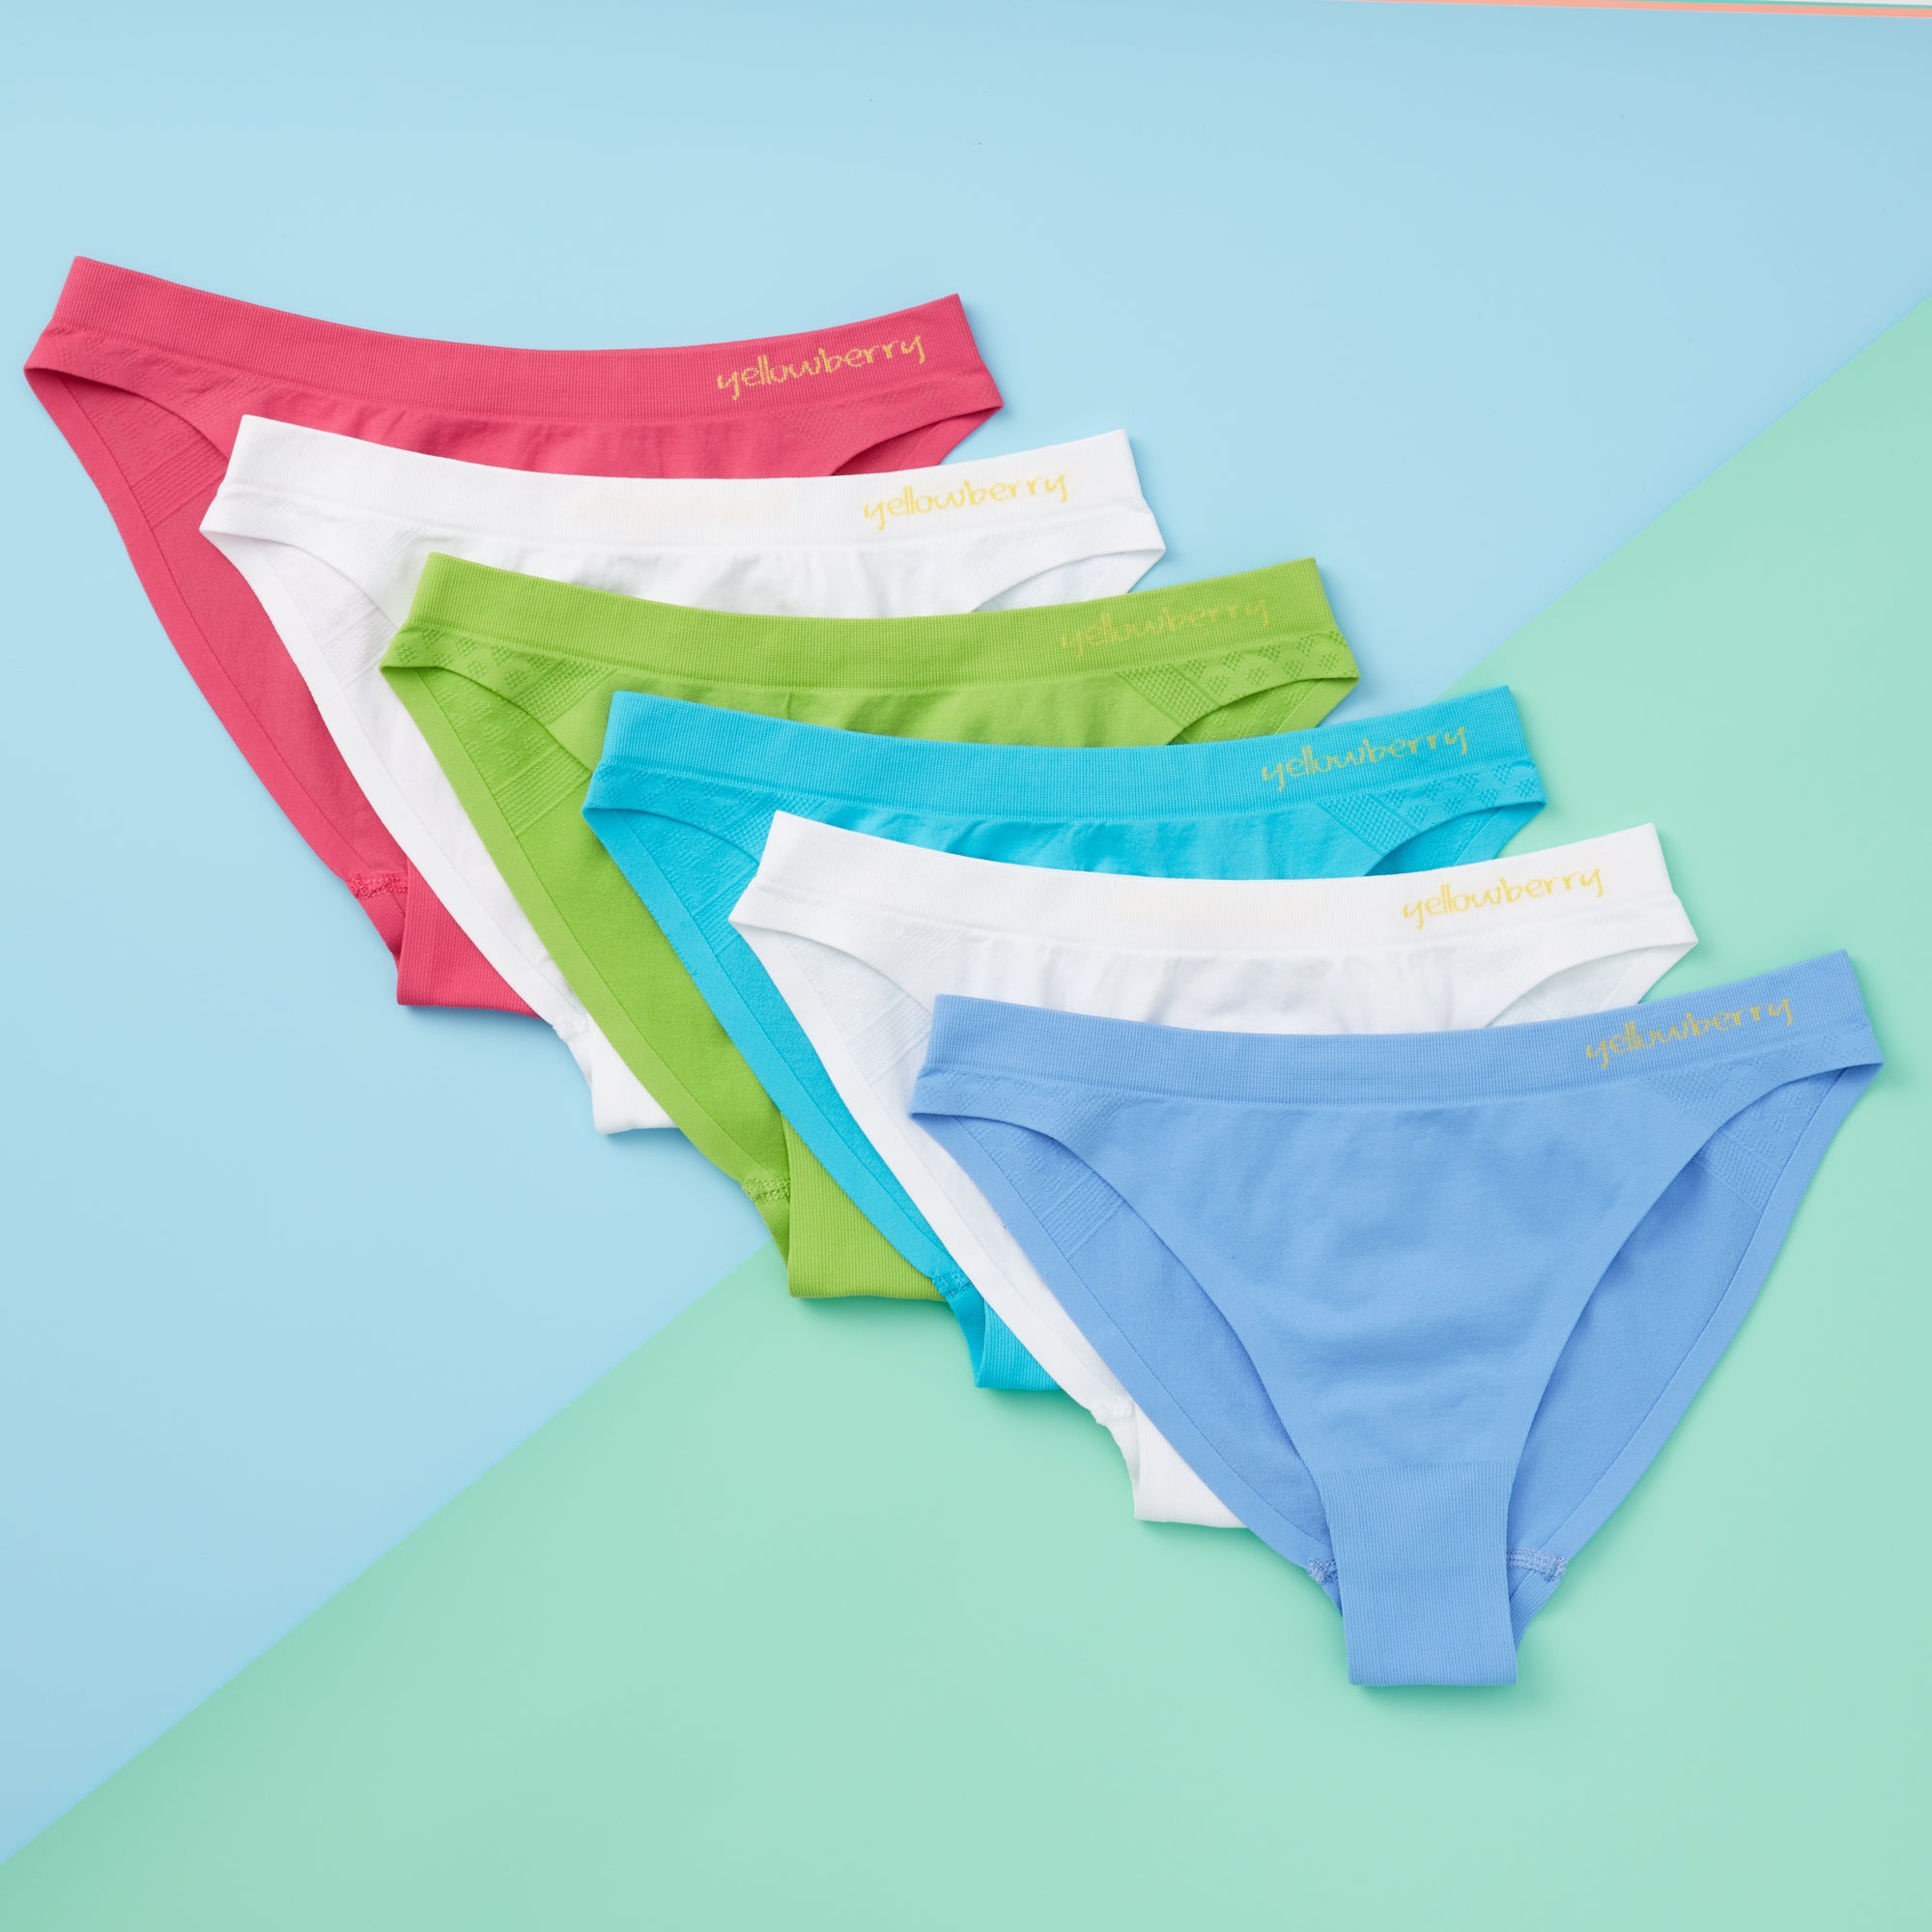 Soft girls briefs. Seamless, no itchy labels. From organic Cotton.